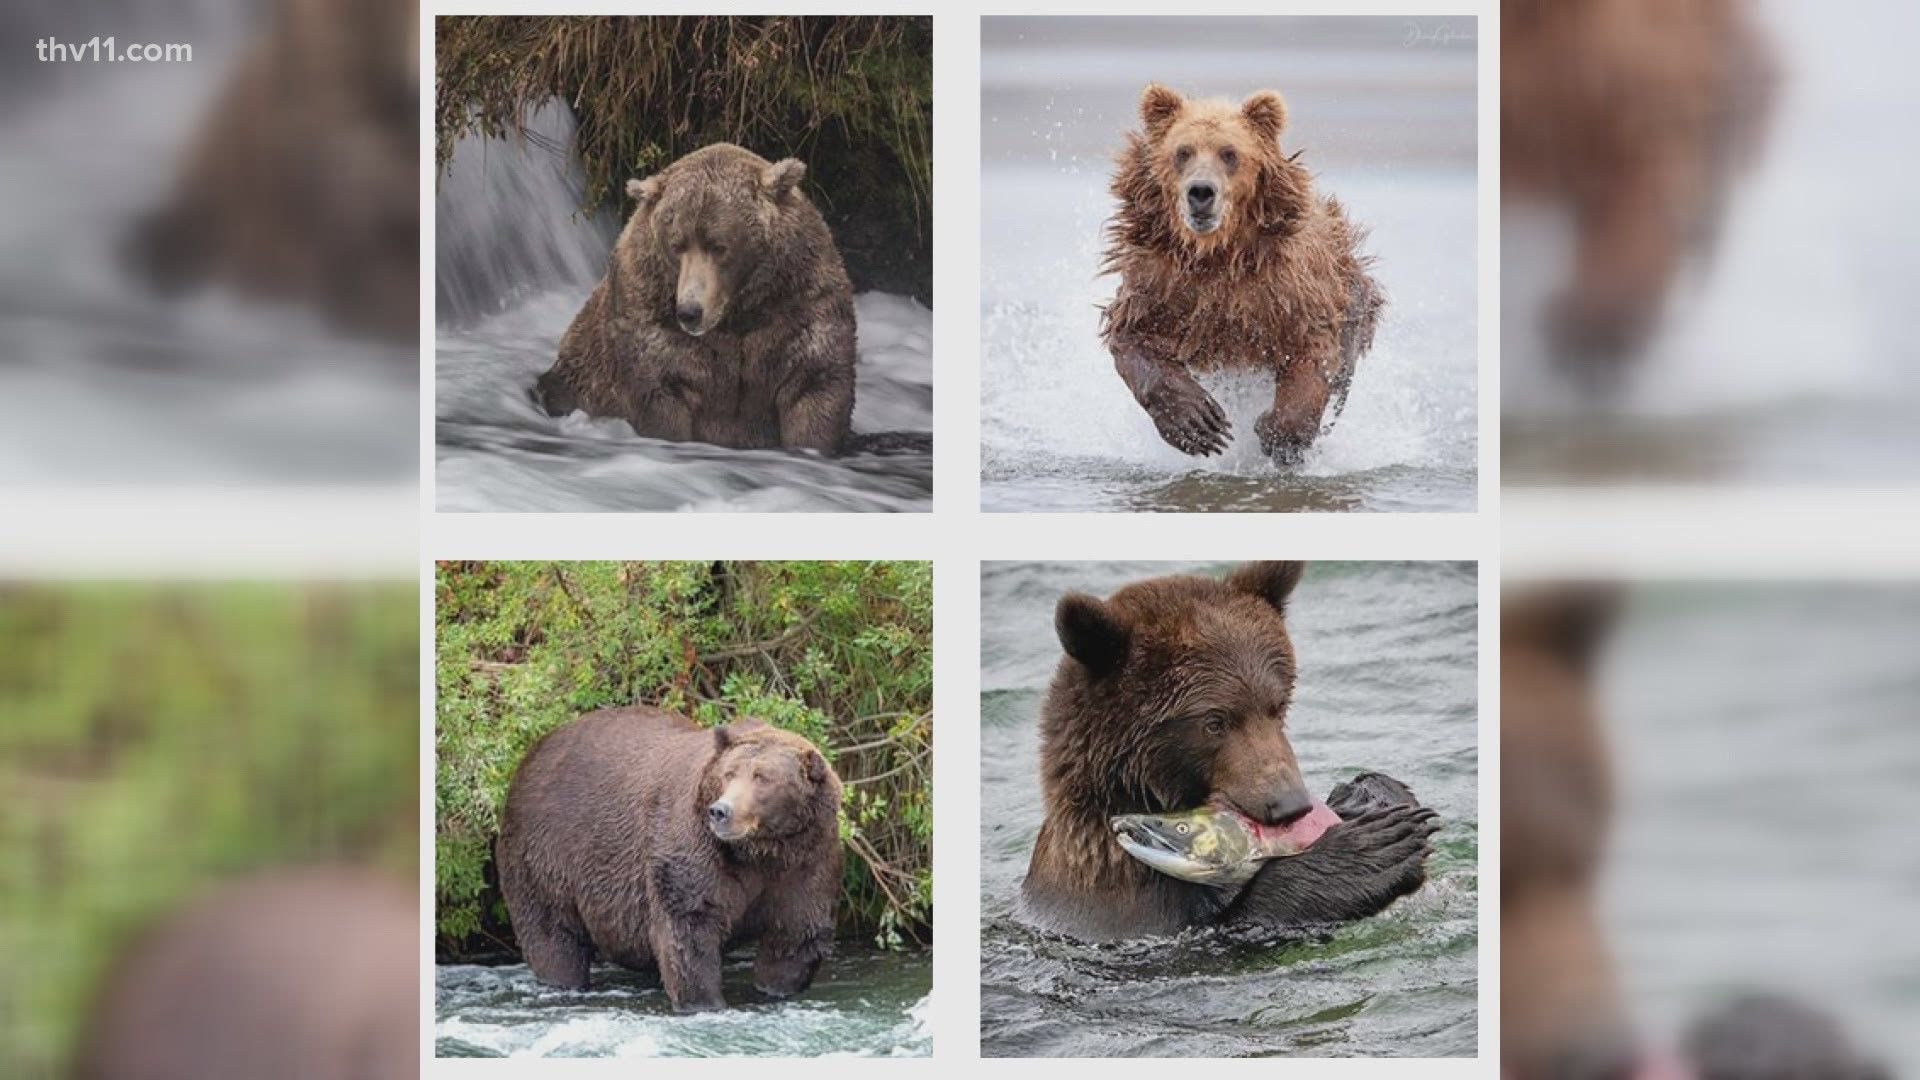 The Katmai National Park and Preserve in Alaska holds an annual competition to celebrate the chubbiest brown bears at Brooks River.